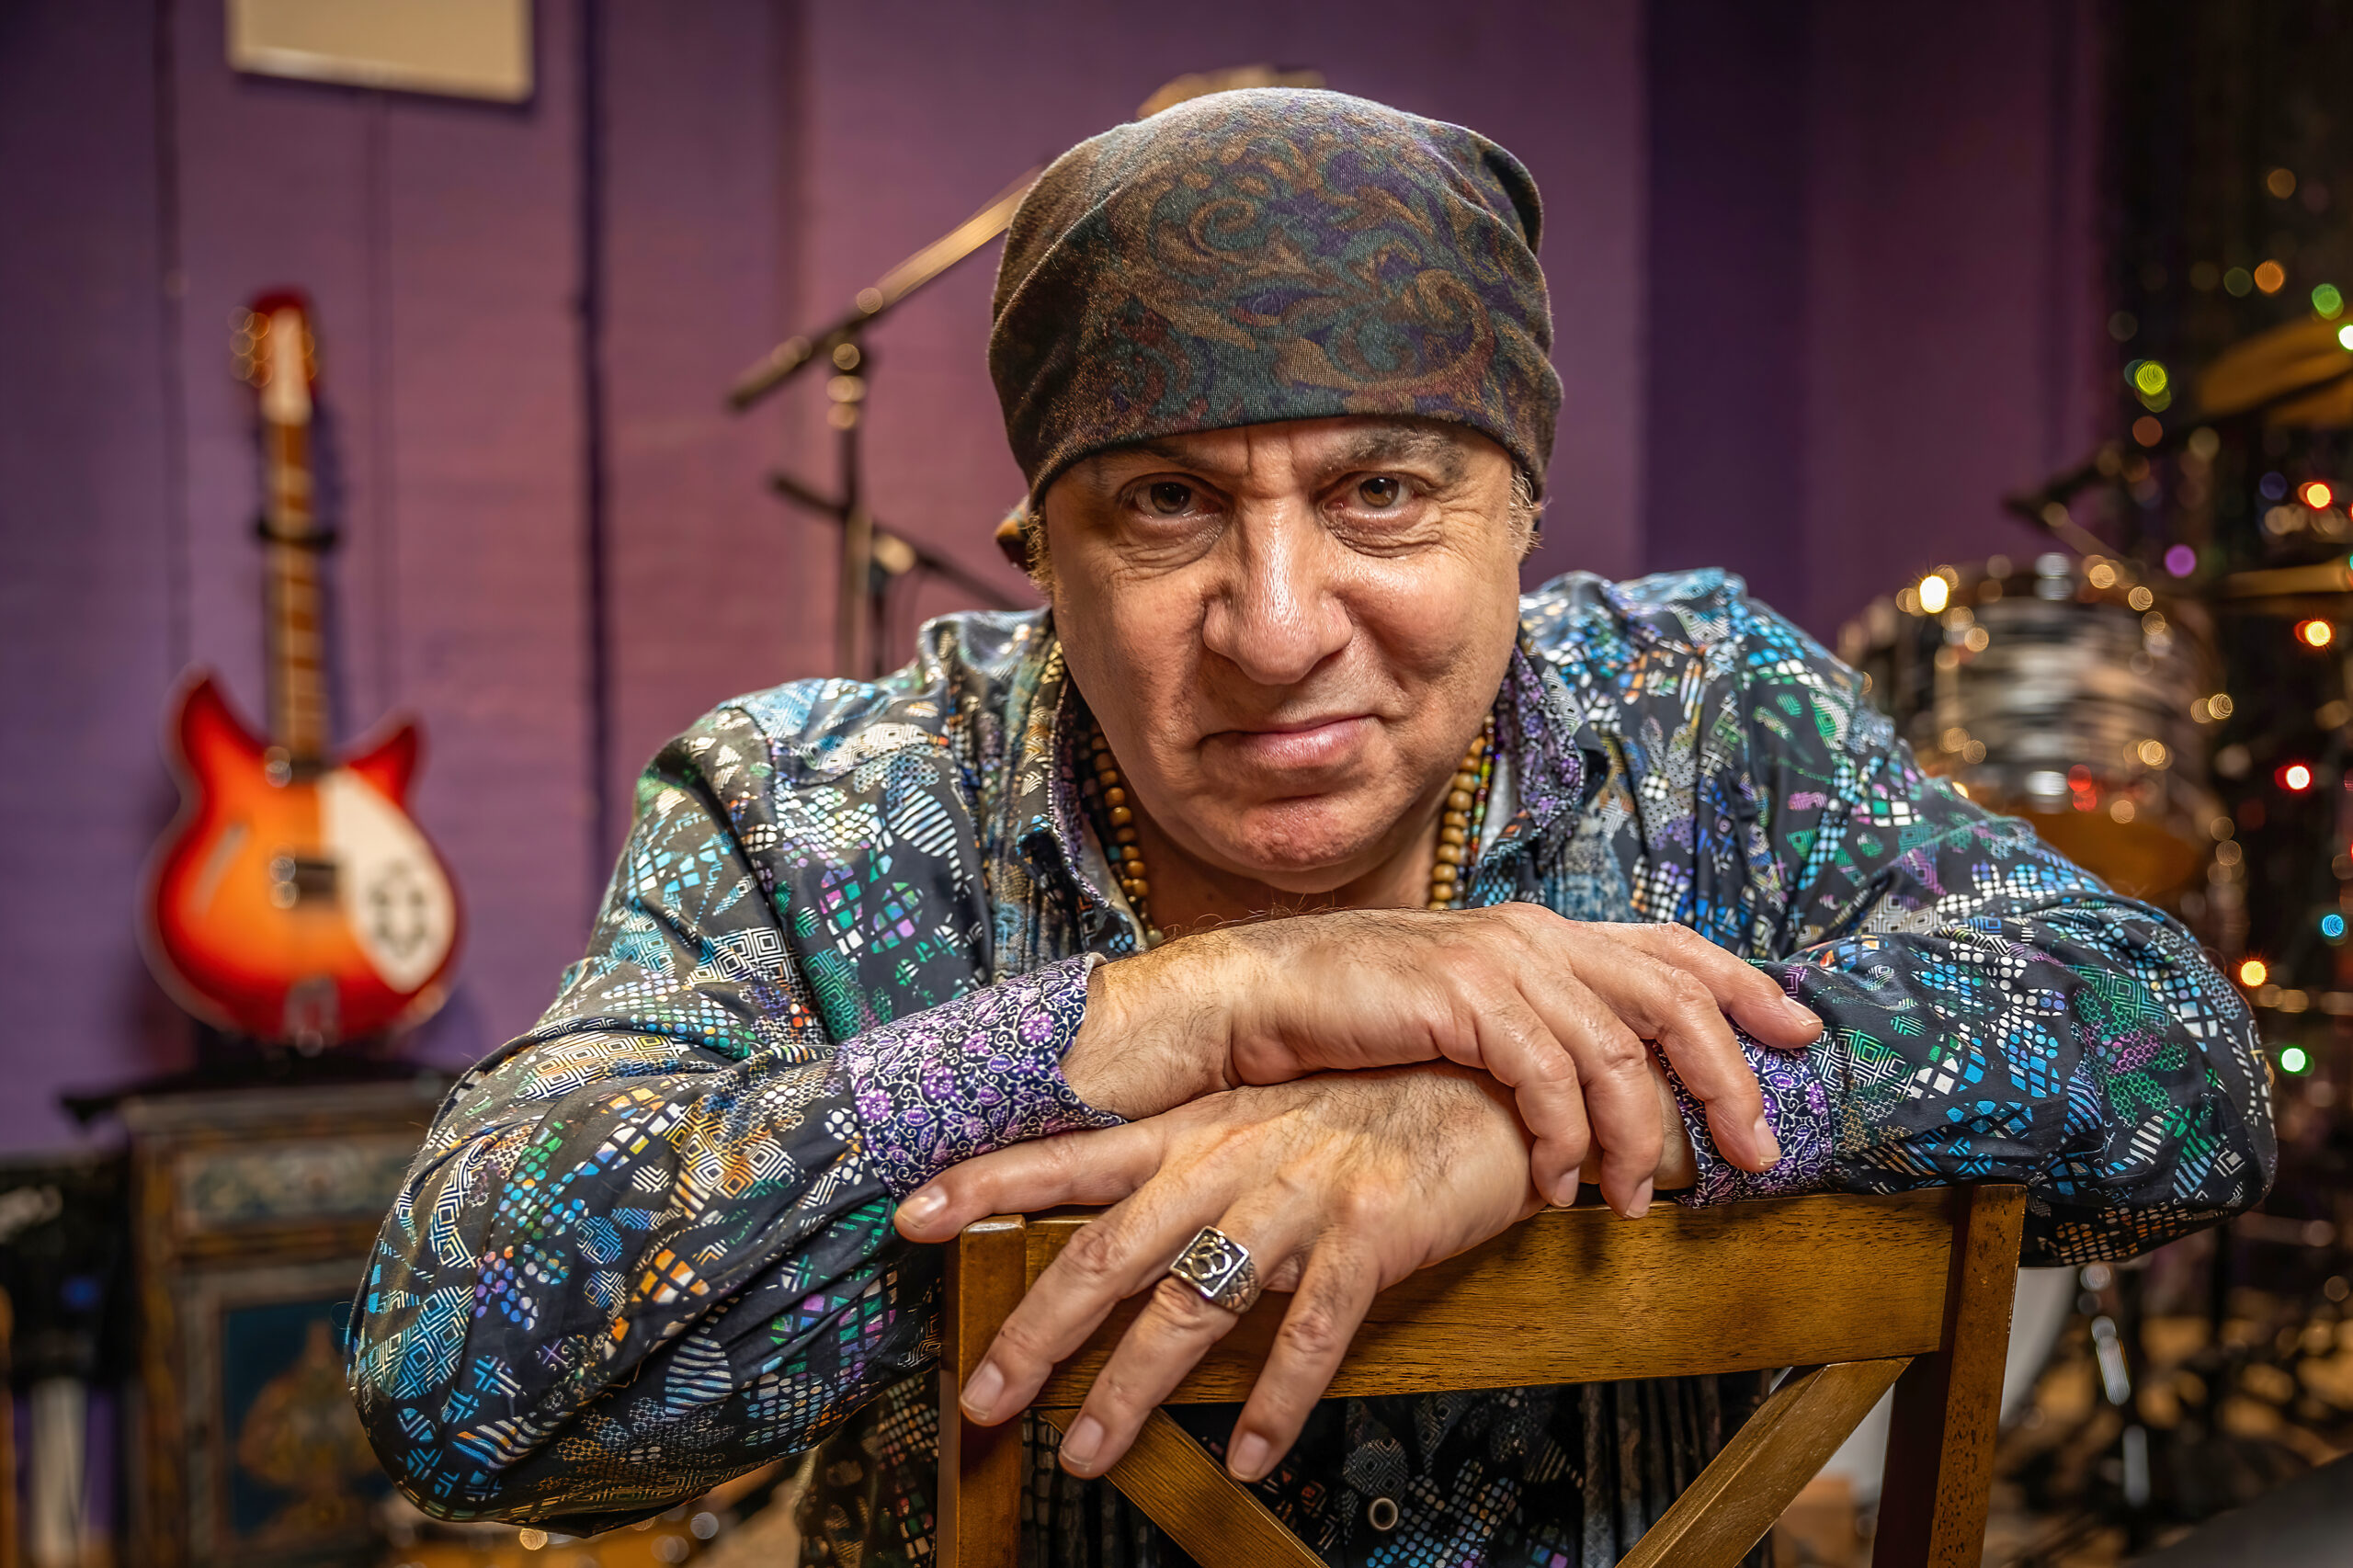 Watch Bruce Springsteen Induct Steven Van Zandt Into the New Jersey Hall of Fame